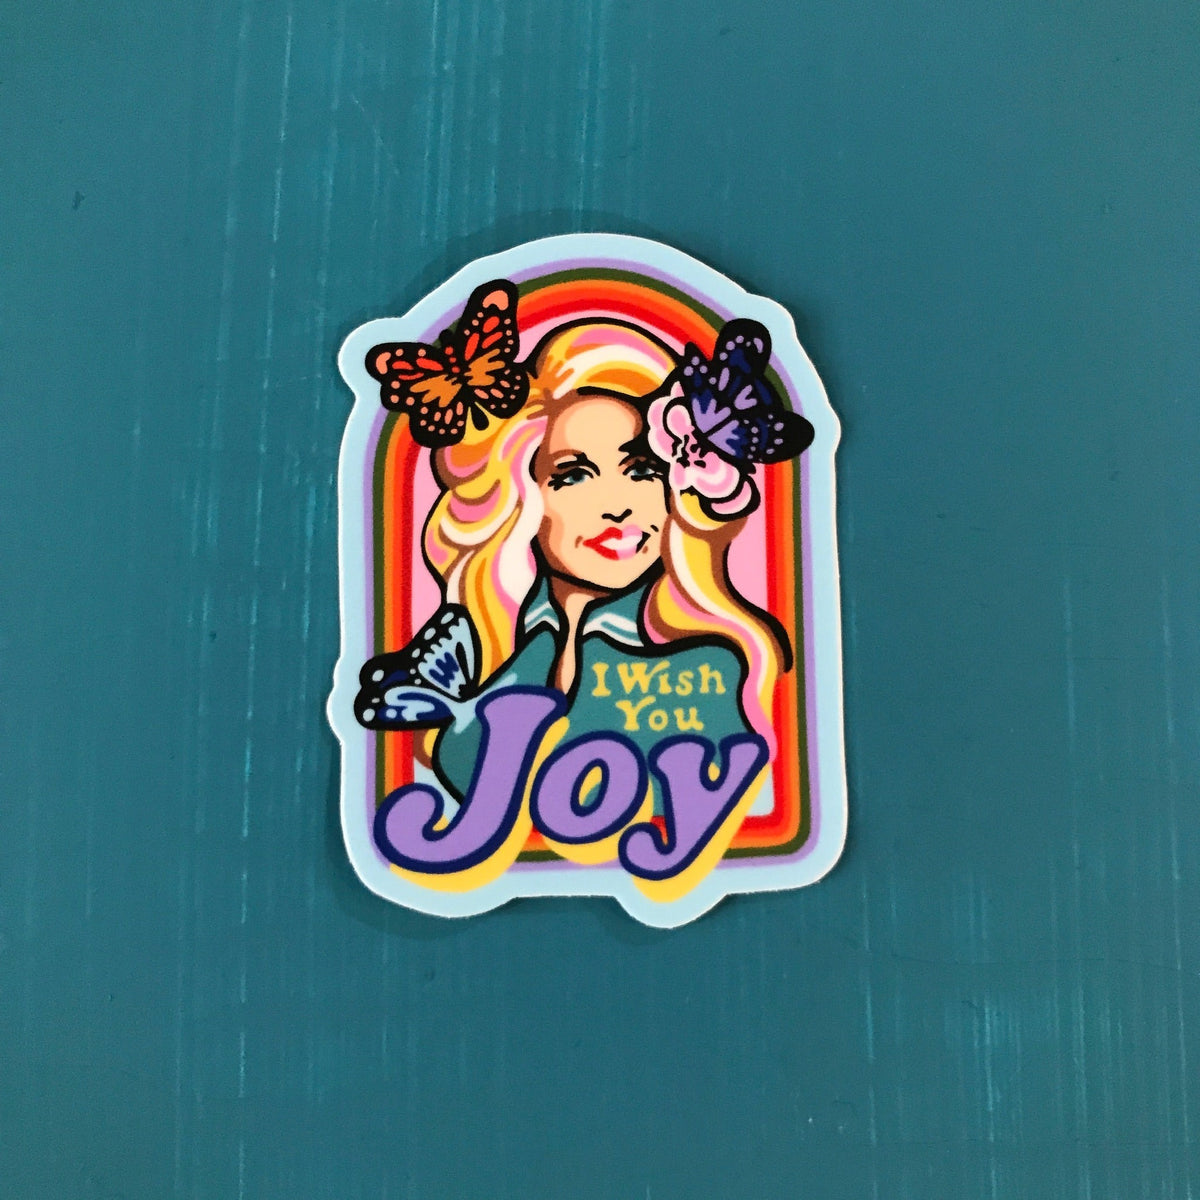 Vinyl sticker with an illustration of Dolly Parton. It says &quot;I wish you joy&quot; and she has butterflies in her hair. 